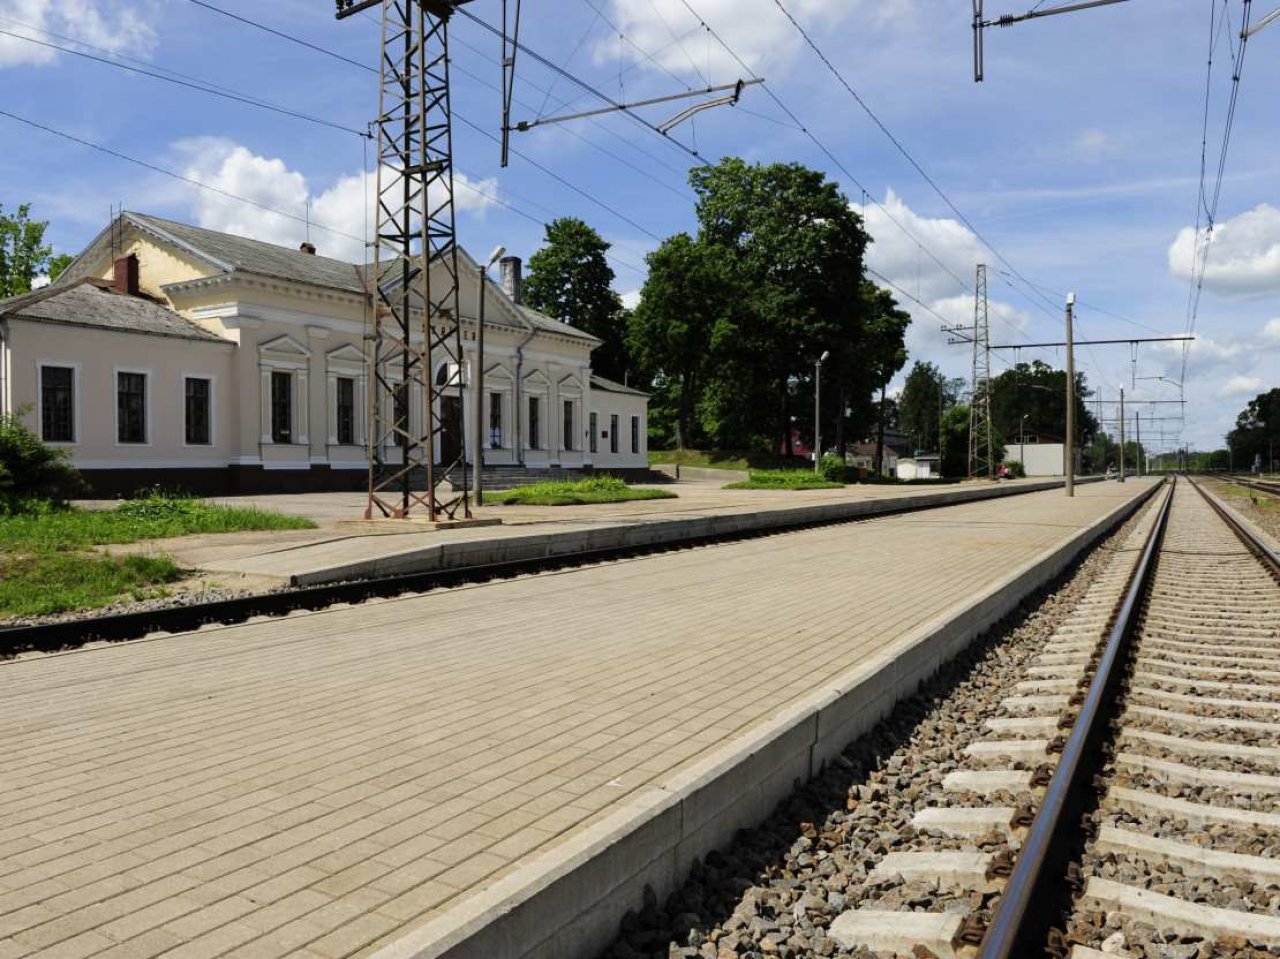 Electrification of 70 km of railway lines in Riga and Pieriga will be implemented using the Recovery and Resilience Facility (RRF)